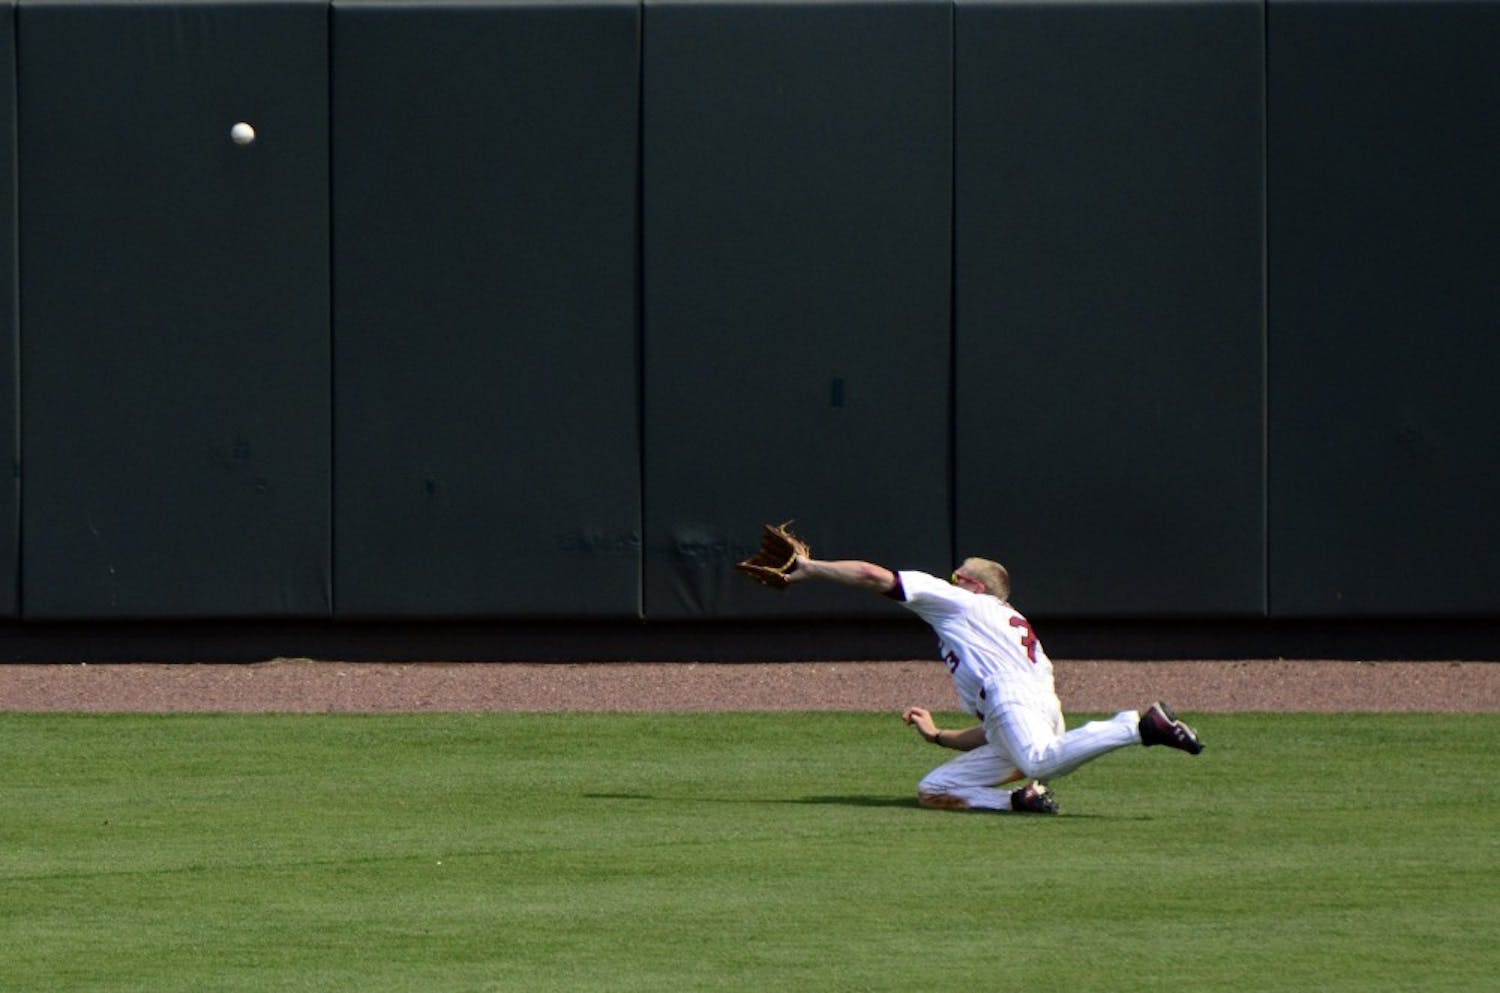 Tanner English makes a diving catch in the top of the ninth inning.